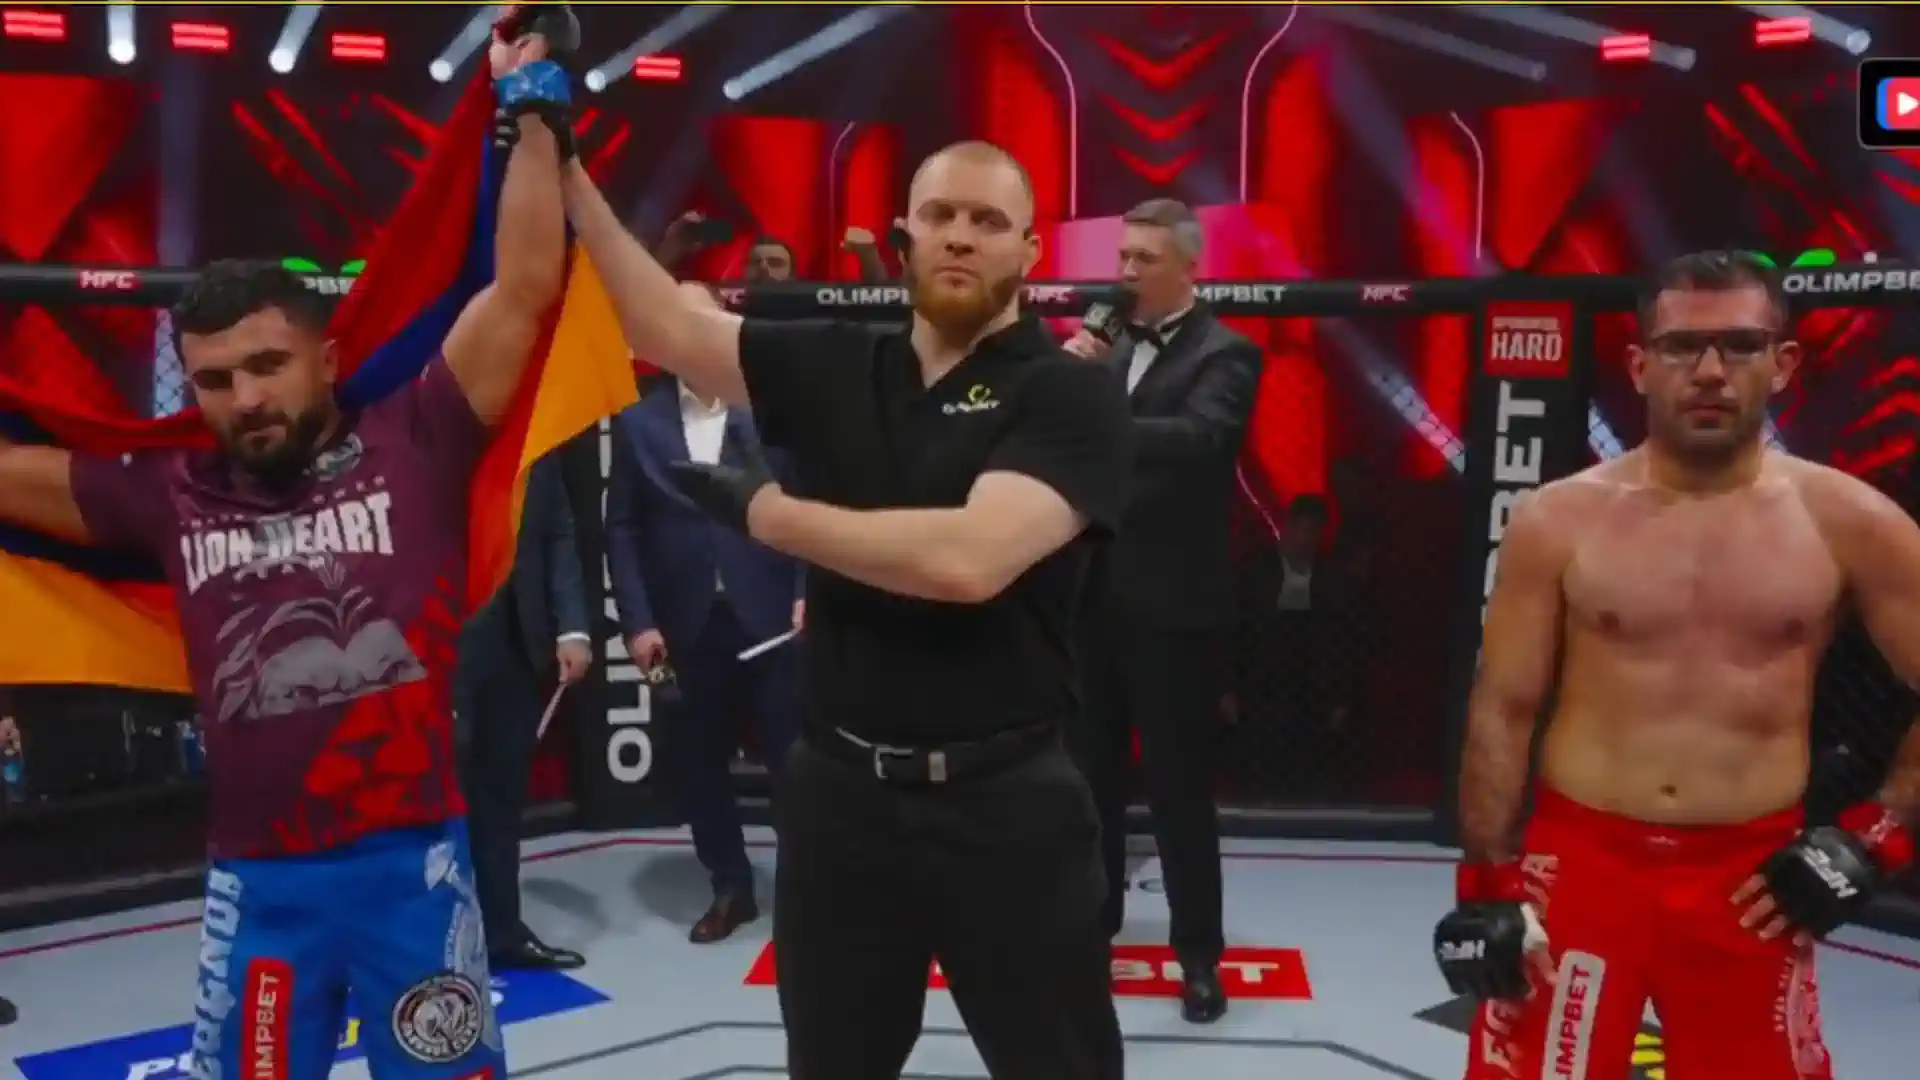 Arkady Osipyan defeated Ali Heibati by technical knockout (video)